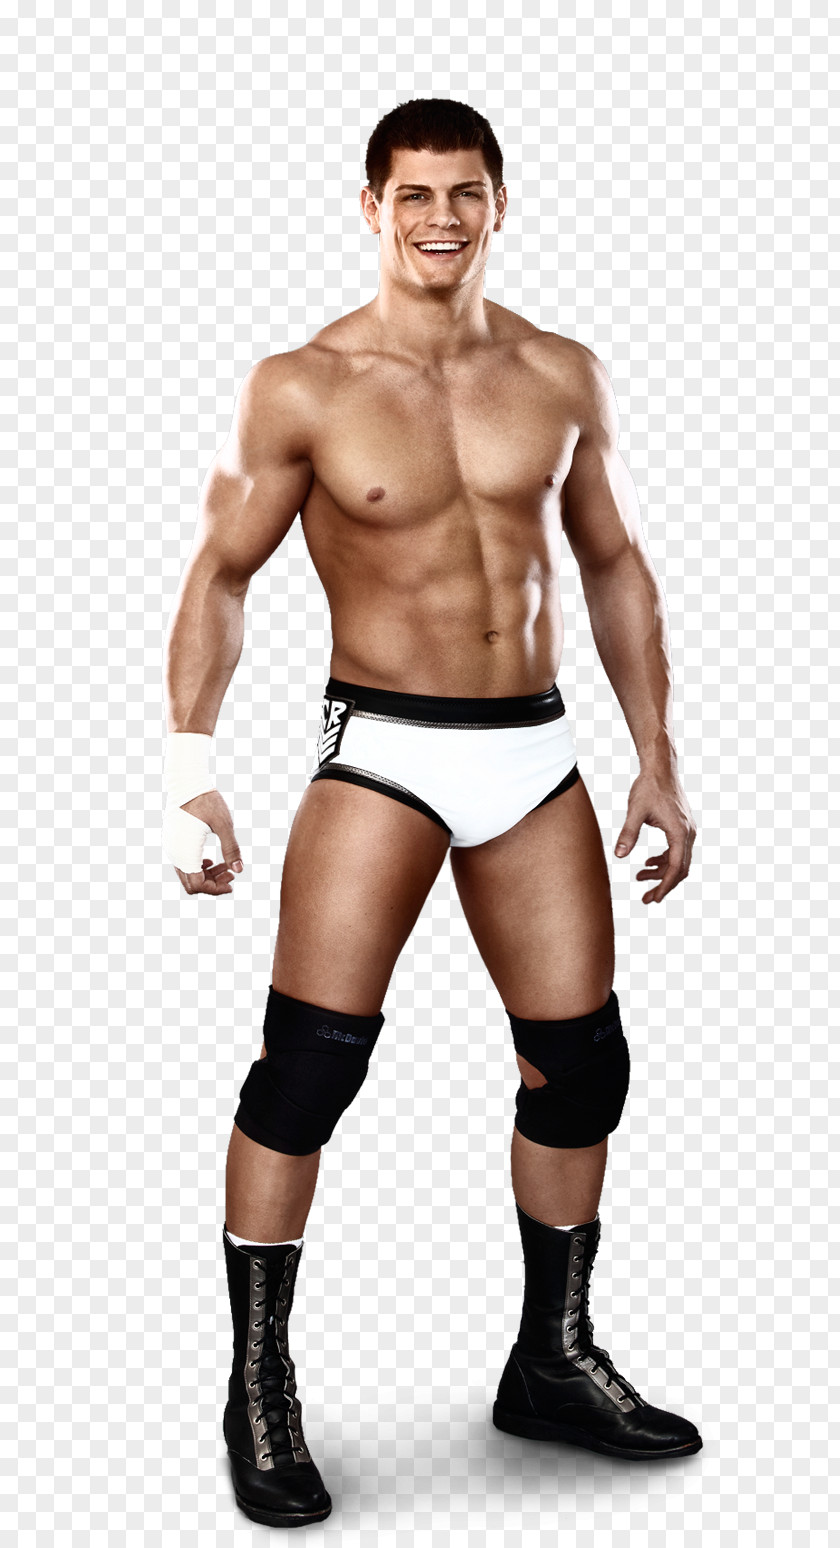 Wrestler Cody Rhodes Professional Male The Prime Time Players Miz PNG